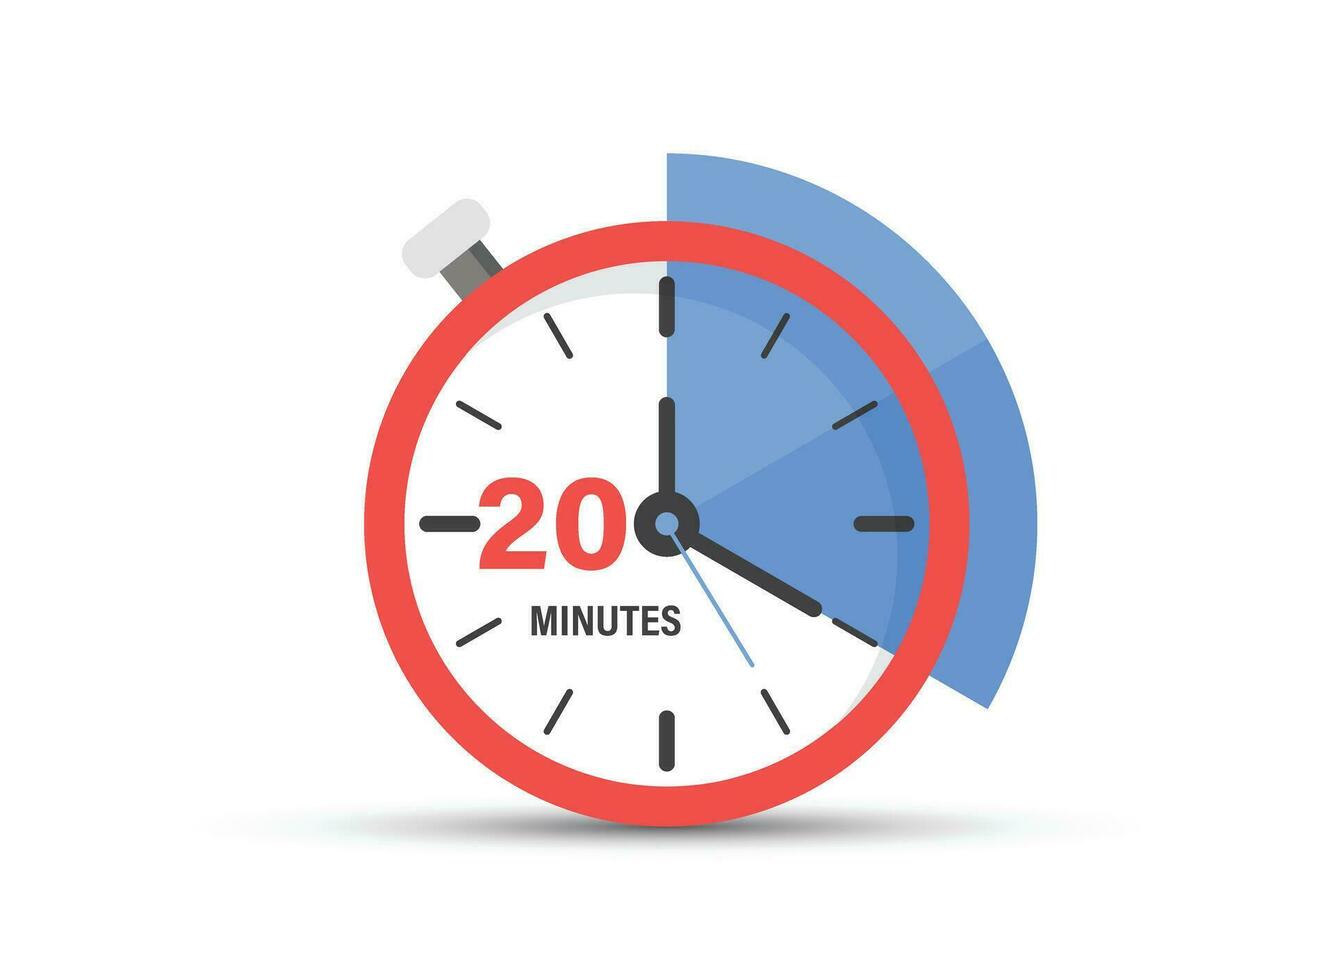 20 minutes on stopwatch icon in flat style. Clock face timer vector illustration on isolated background. Countdown sign business concept.